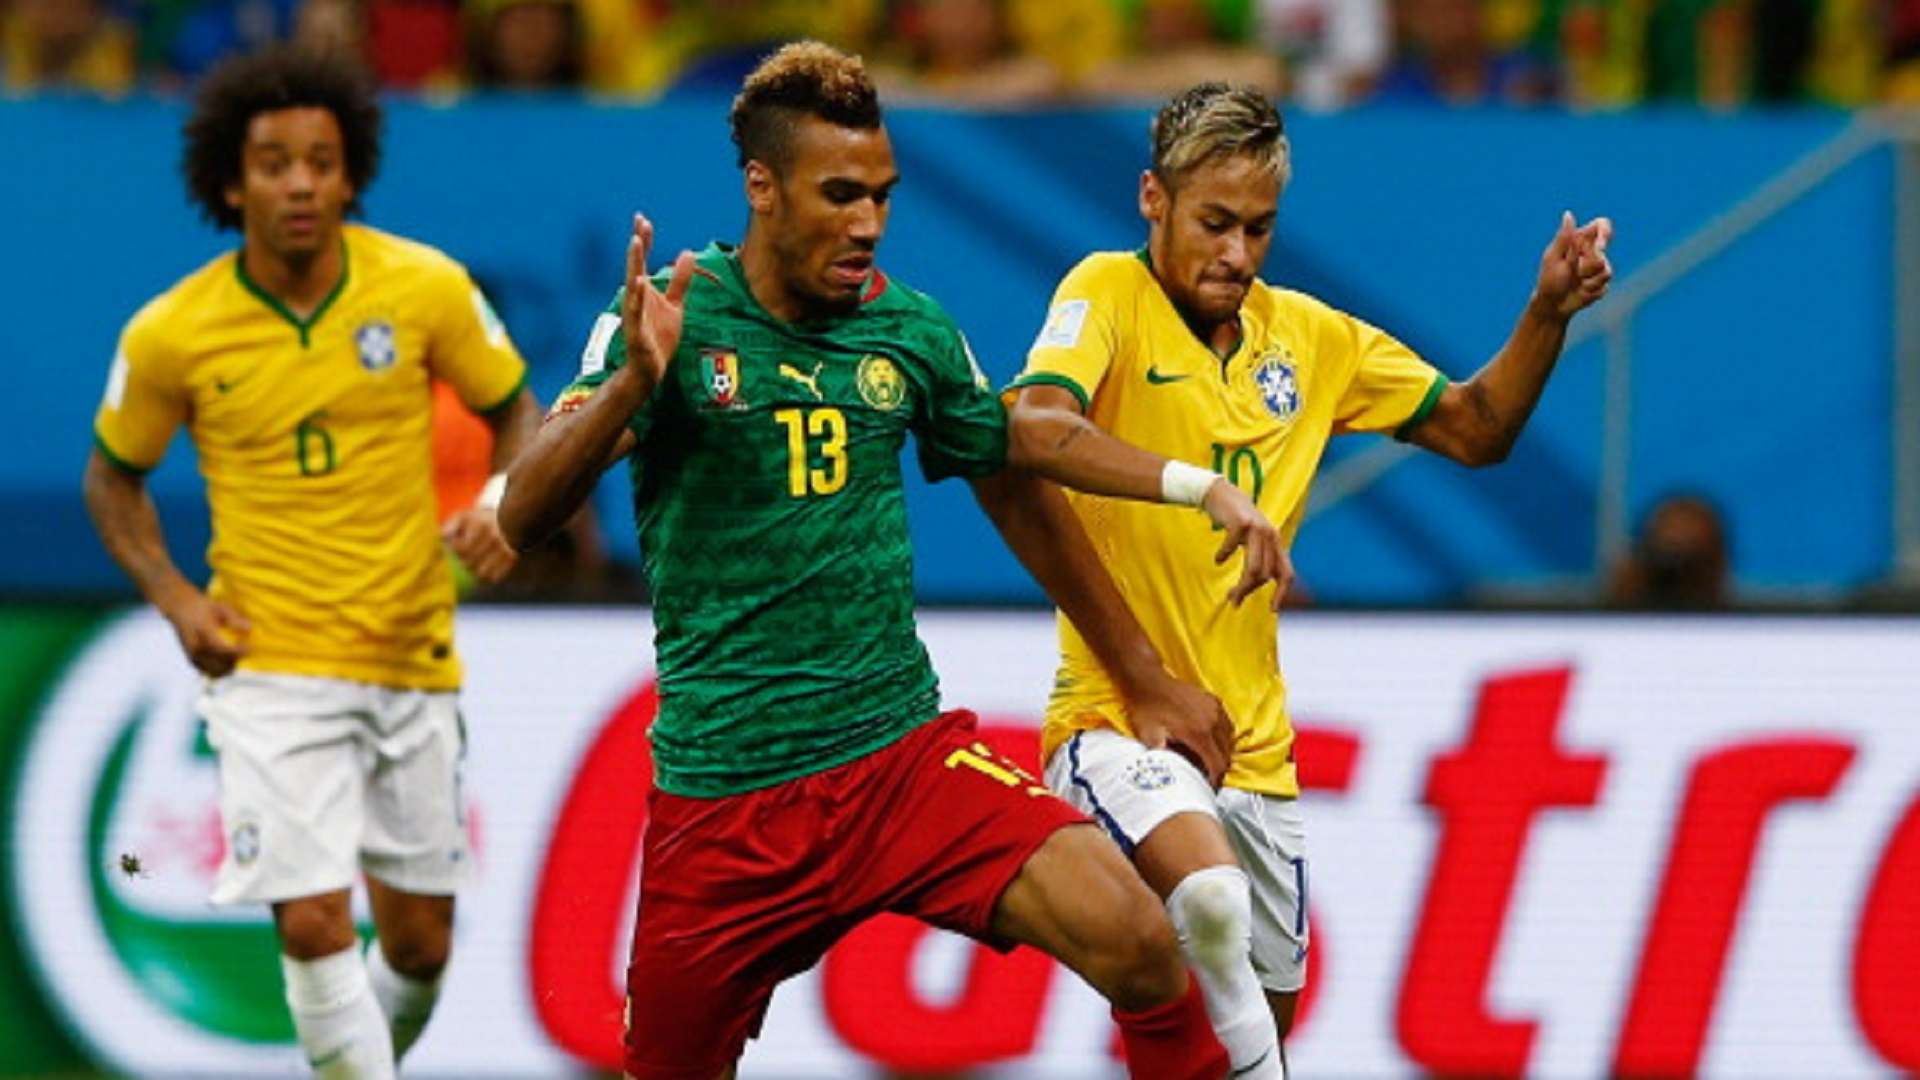 Maxim Choupo-Moting of Cameroon battles with Neymar of Brazil during the 2014 FIFA World Cup Brazil